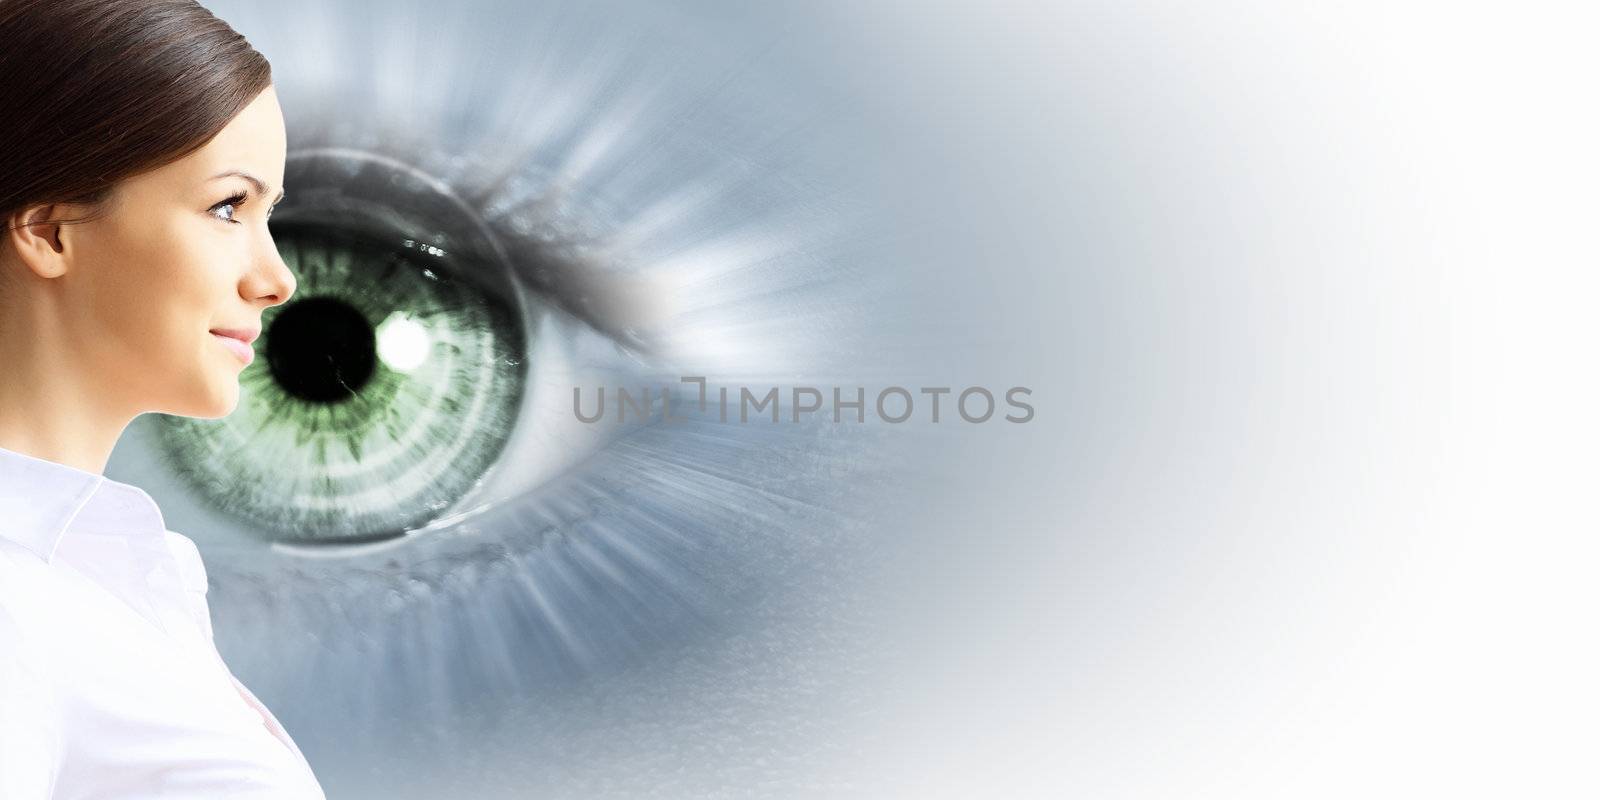 Human eye and woman face on white background